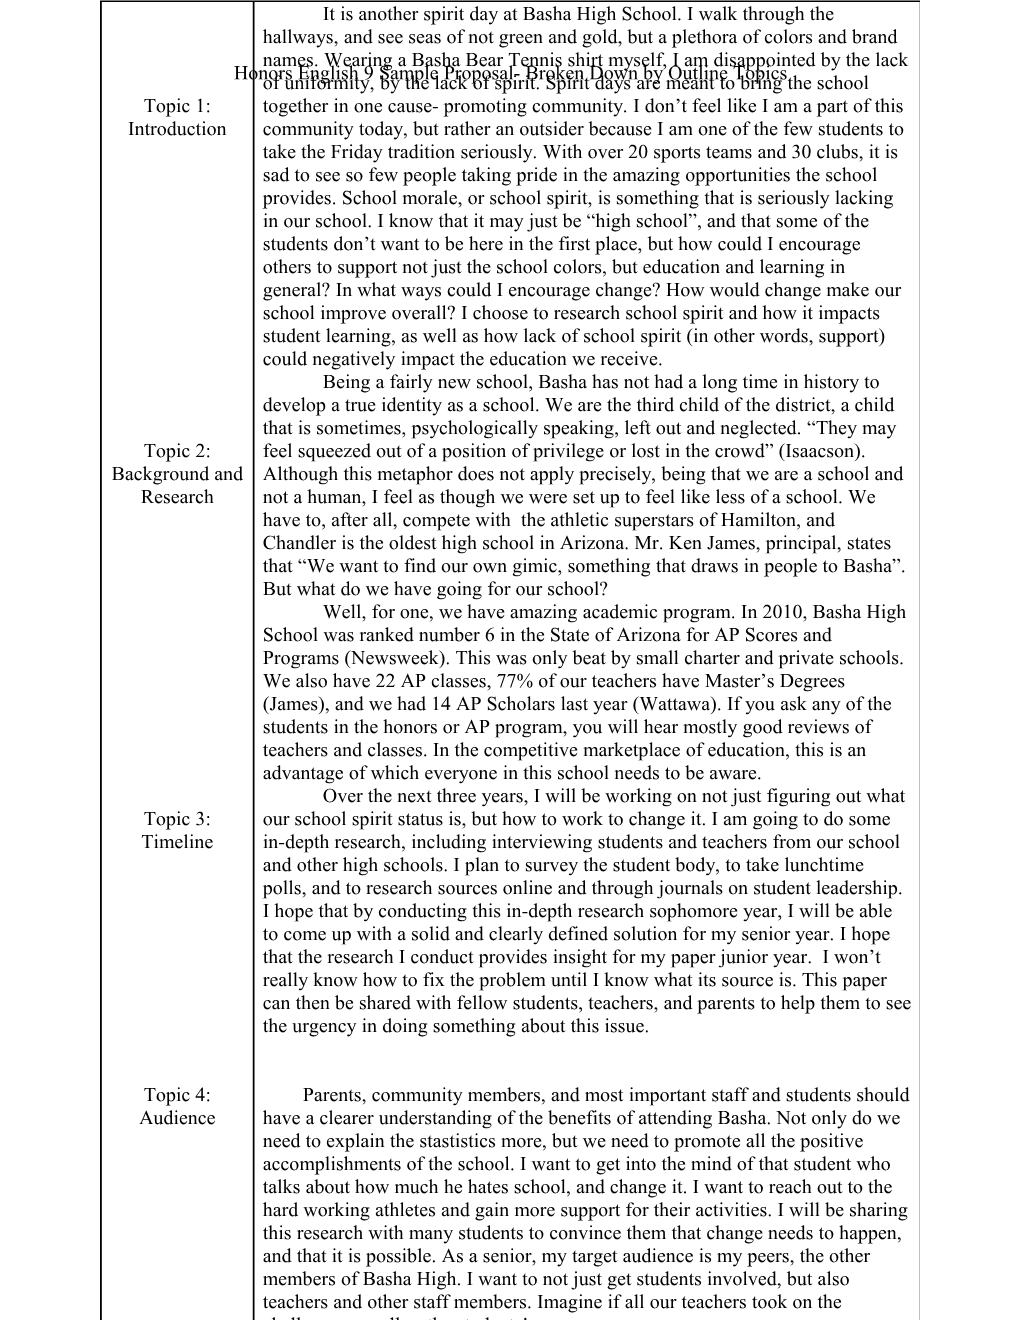 Honors English 9 Sample Proposal- Broken Down by Outline Topics